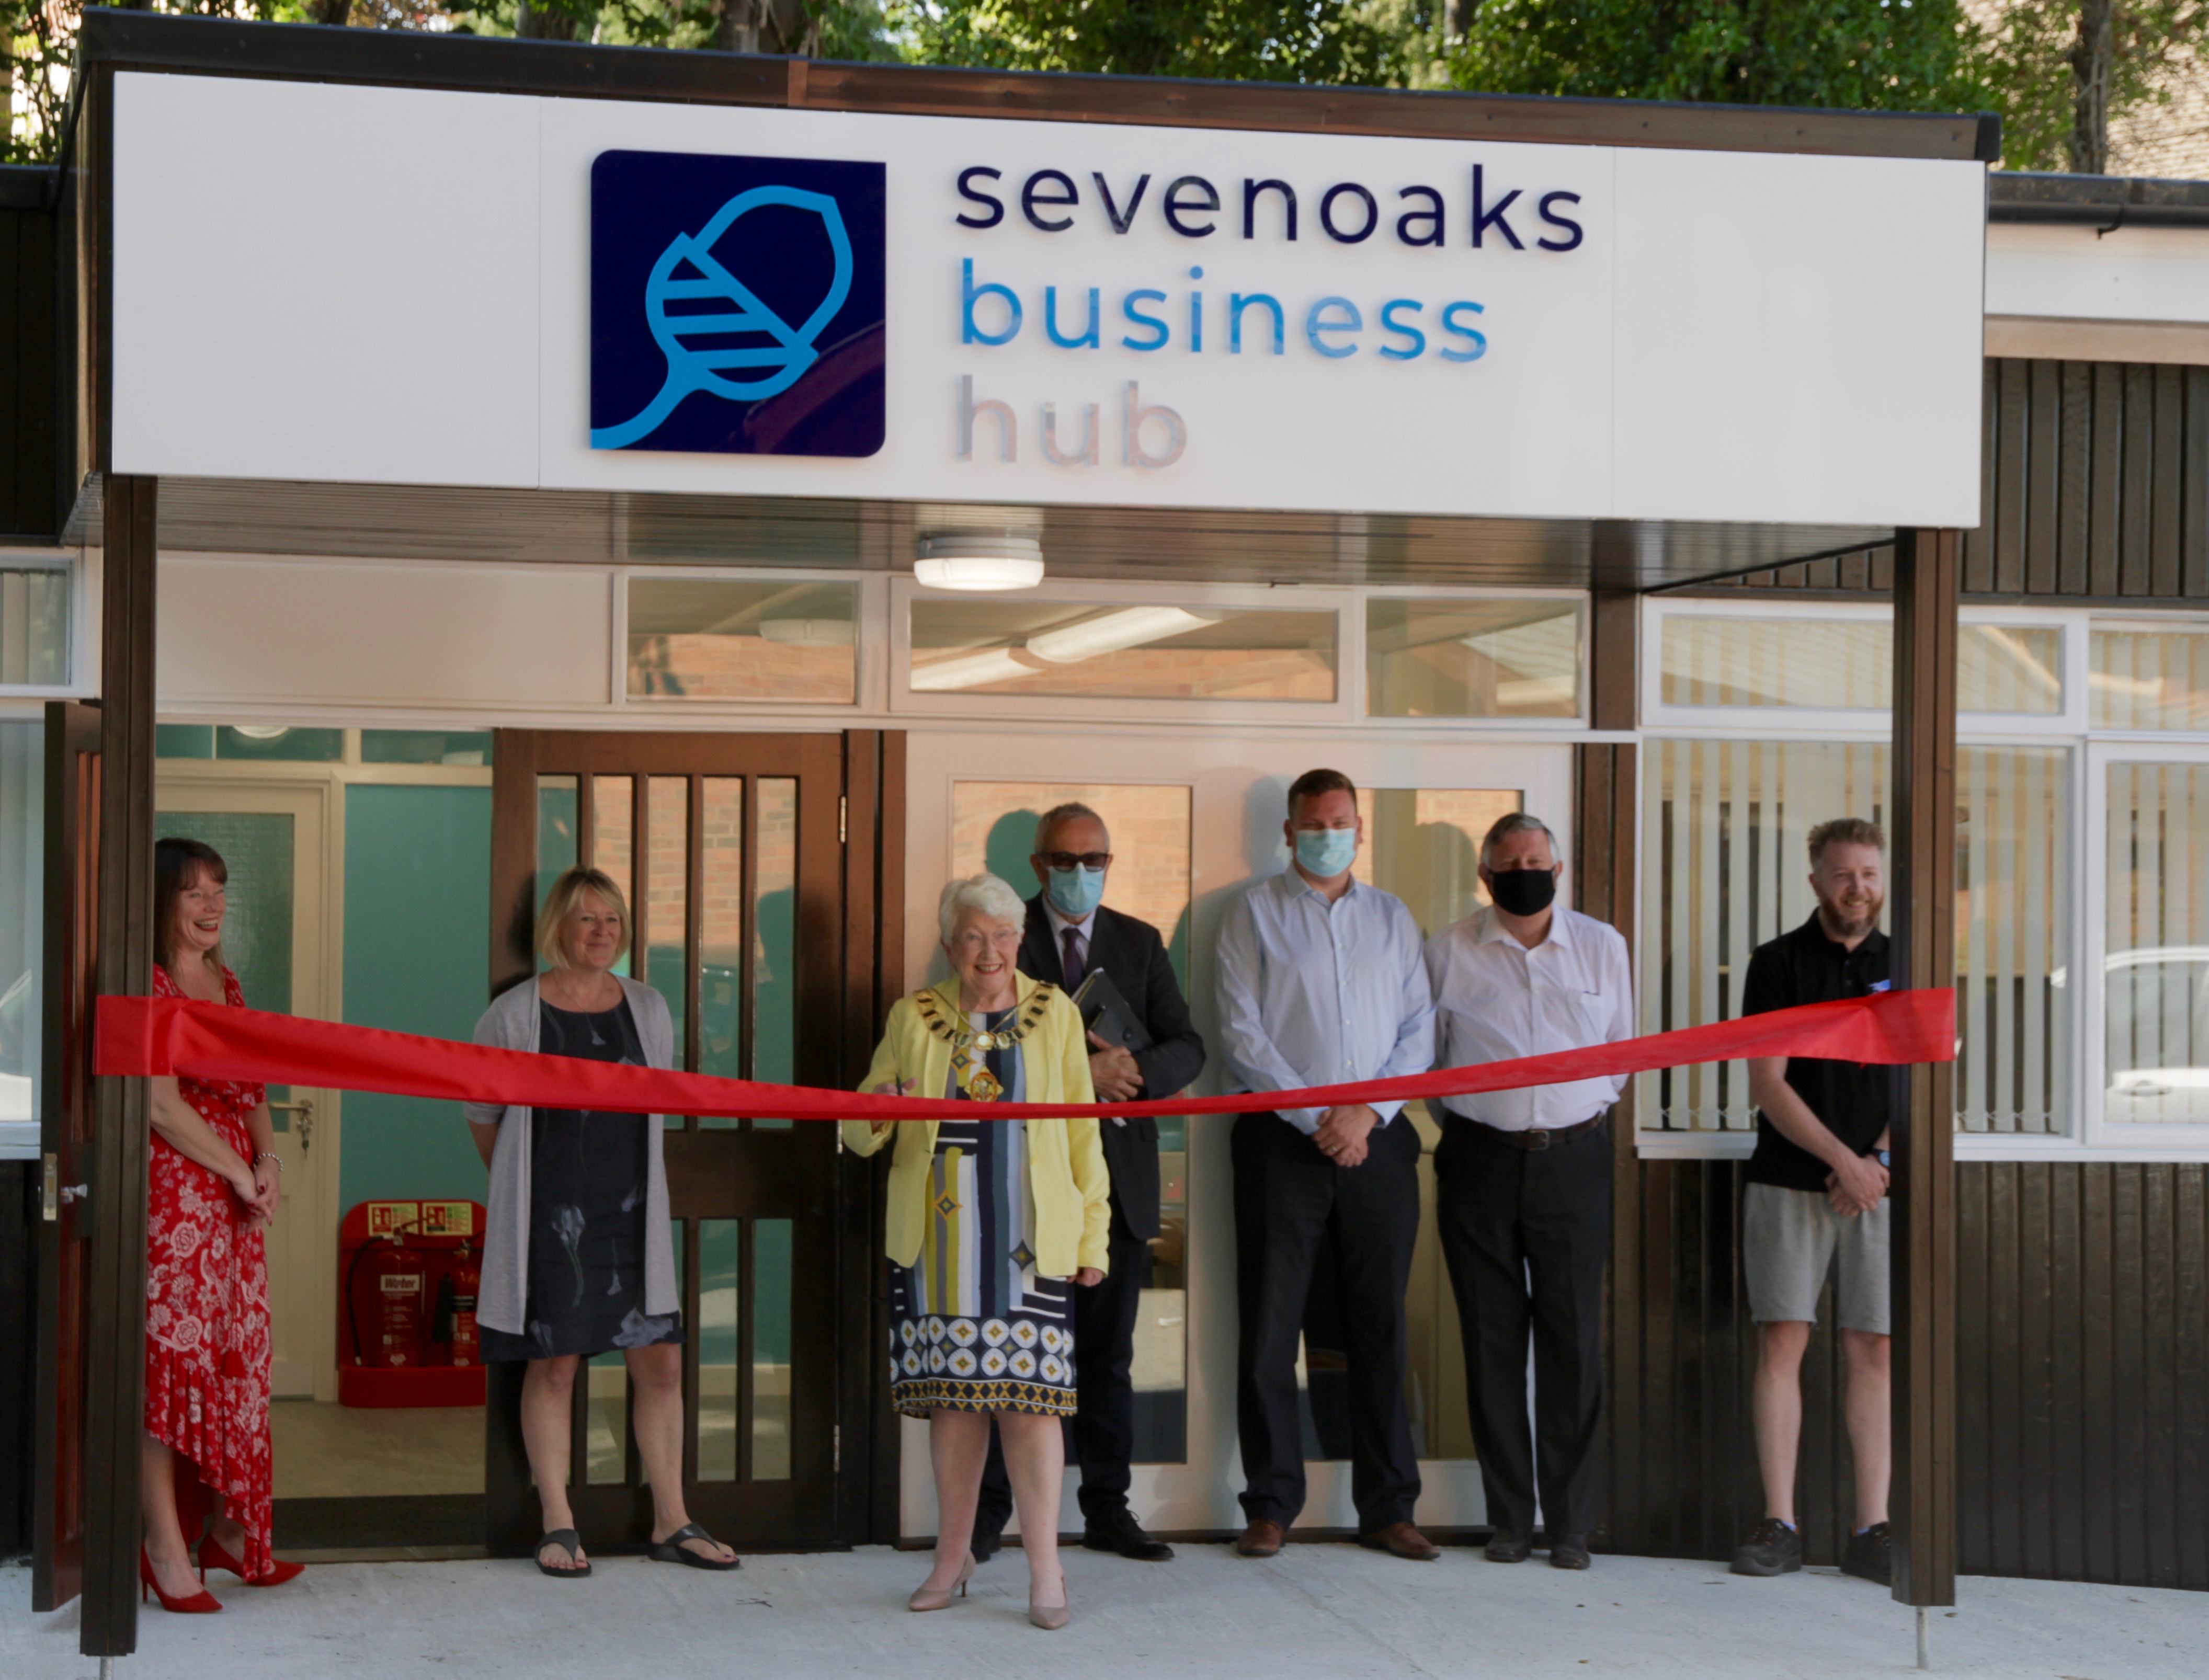 PRESS RELEASE: Business Hub Opening